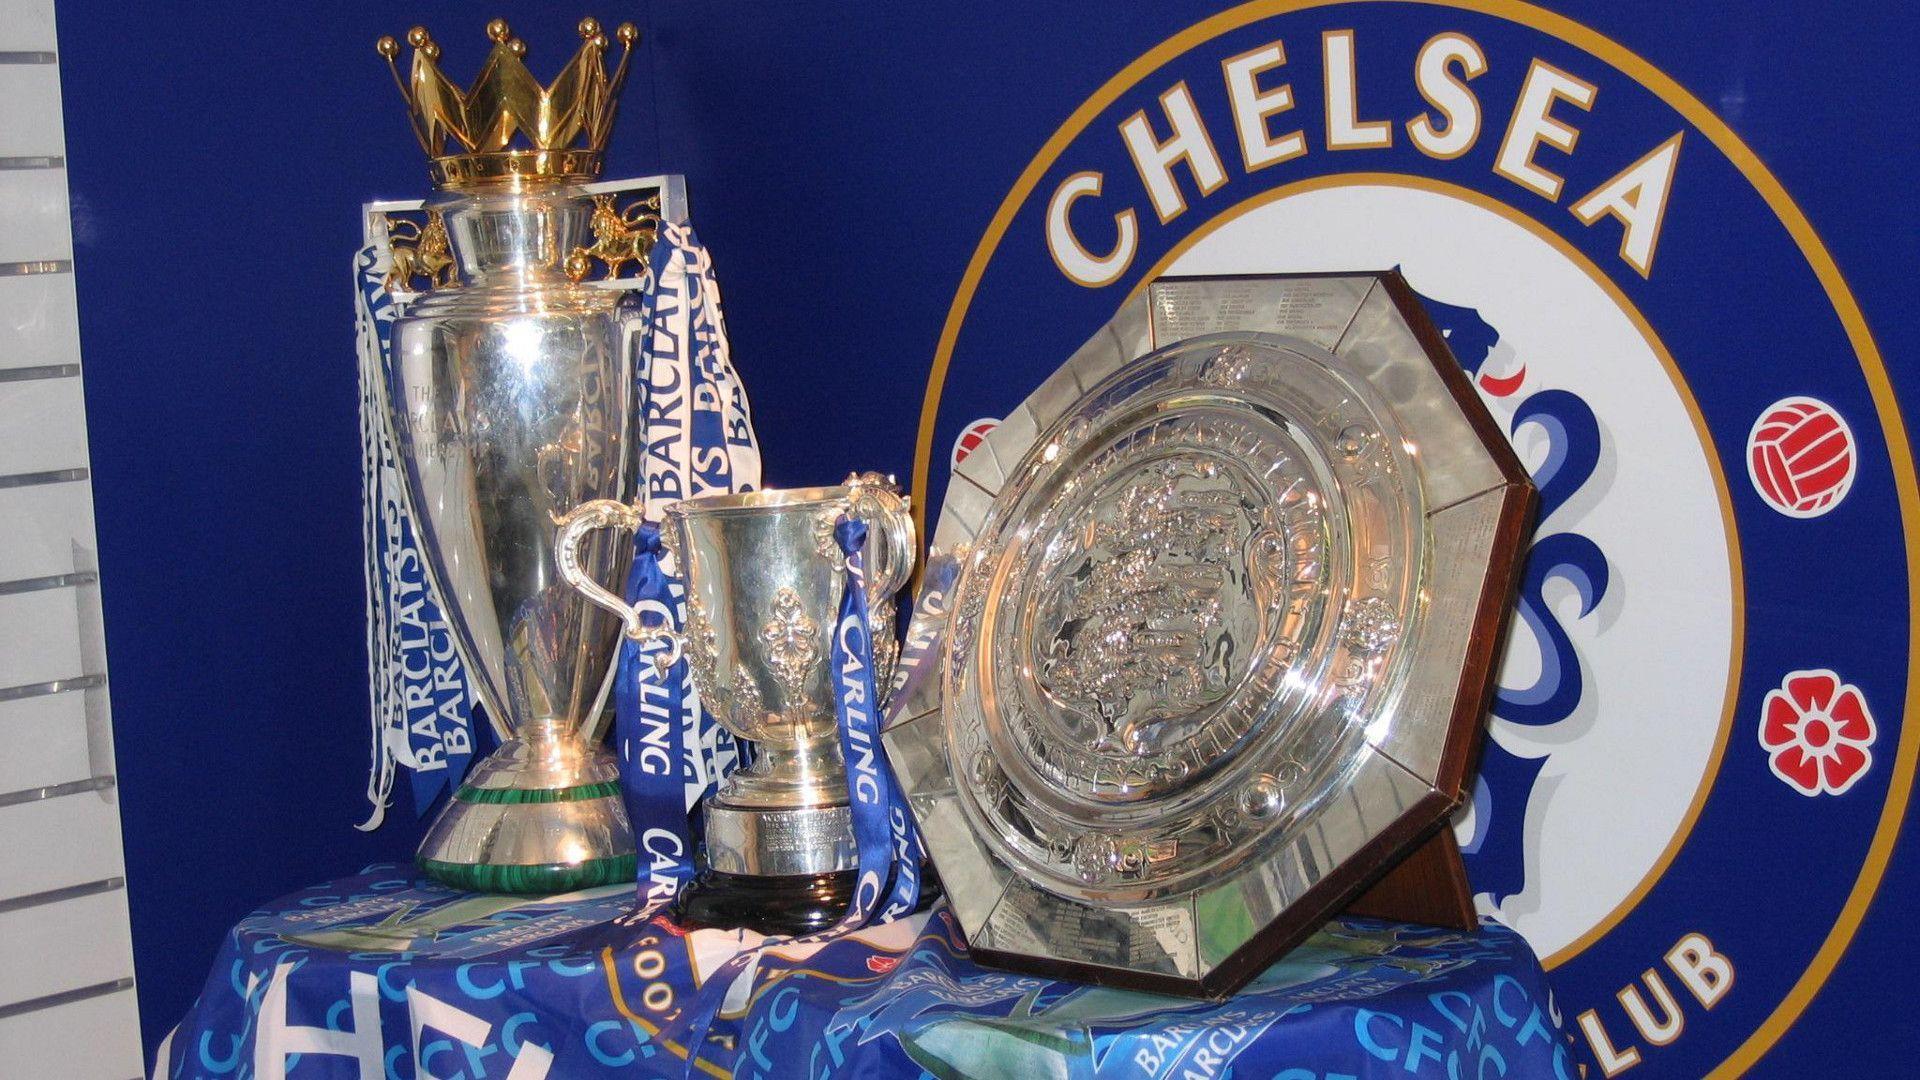 Chelsea FC. Widescreen and Full HD Wallpaper